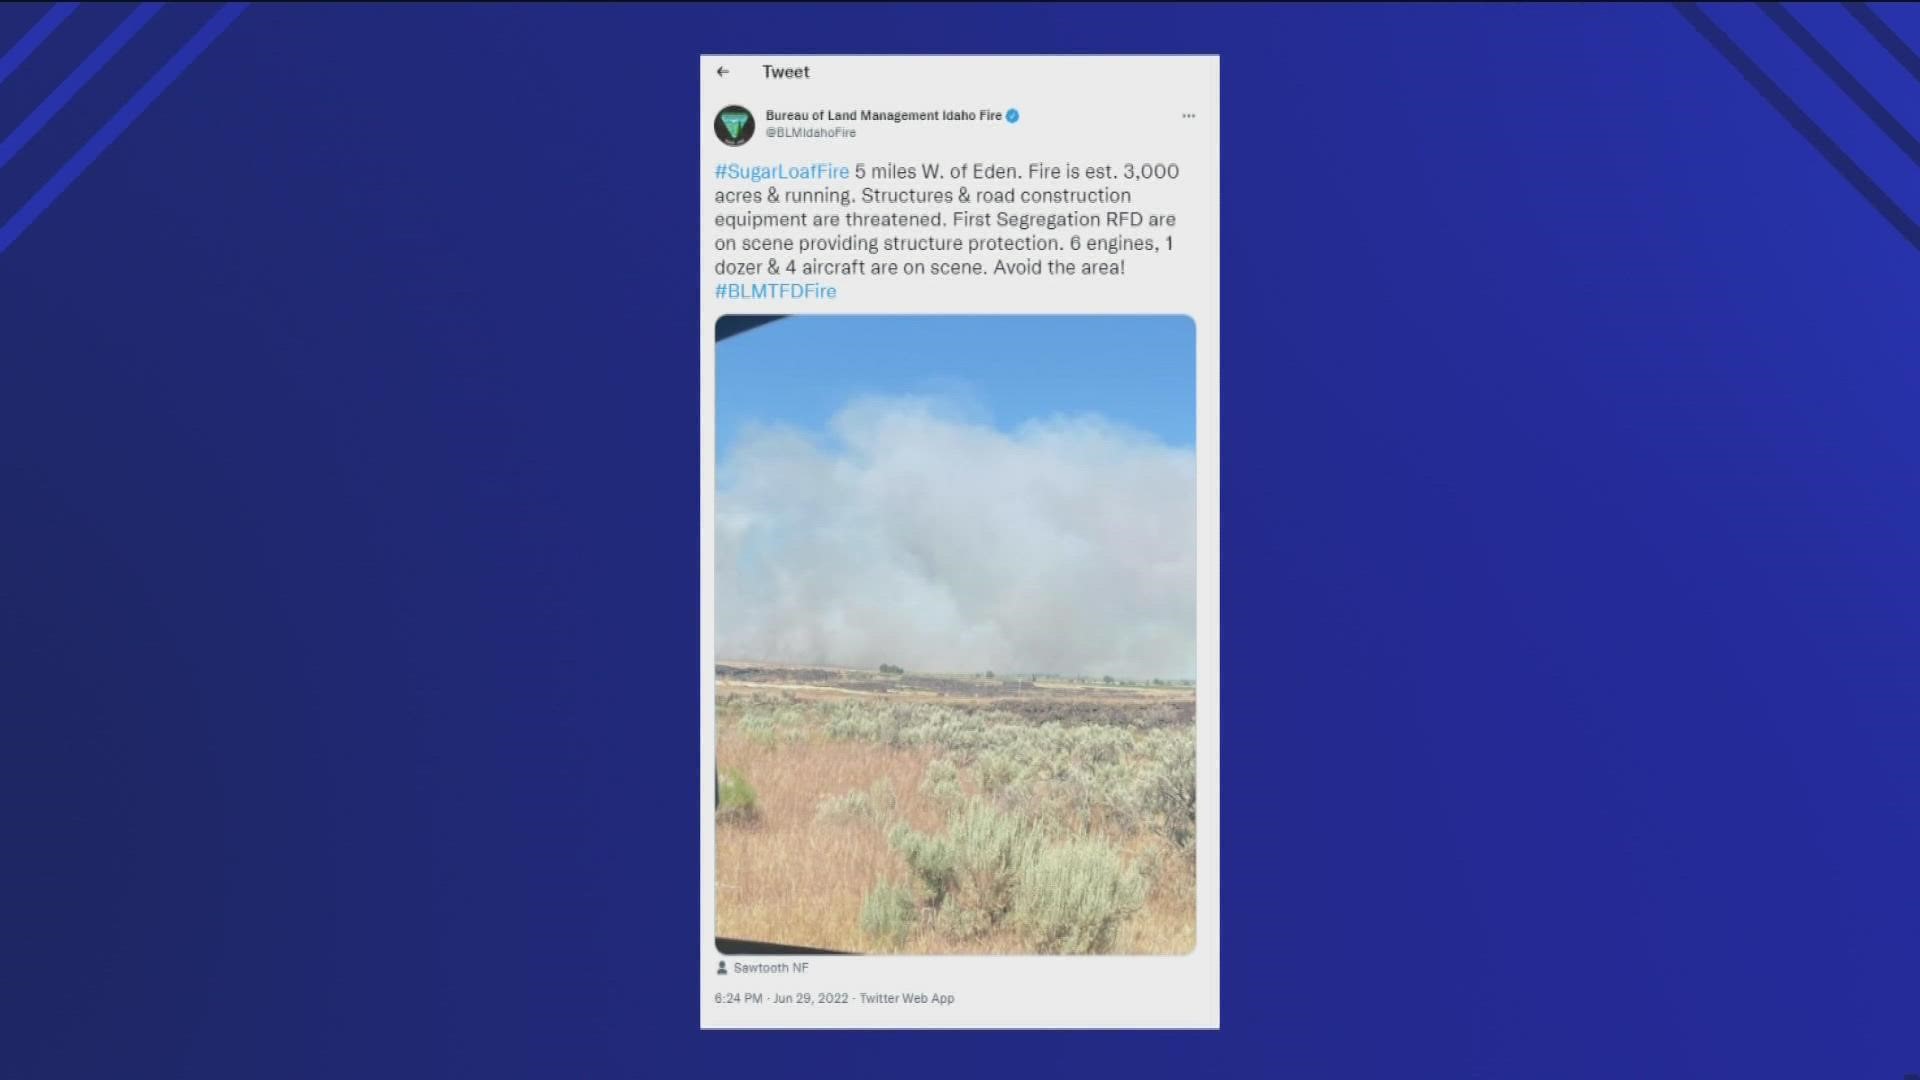 The fire is estimated to be over 3,000 acres and running.